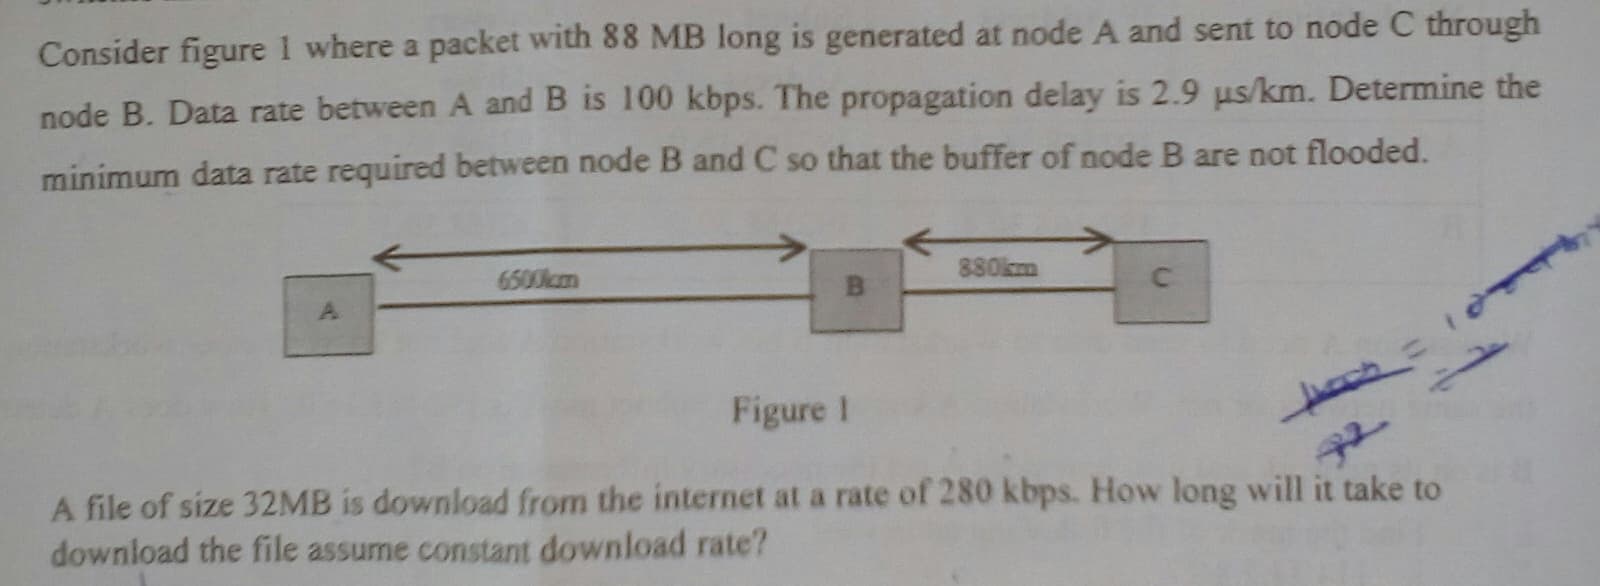 Consider figure 1 where a packet with 88 MB long is generated at node A and sent to node C through
node B. Data rate between A and B is 100 kbps. The propagation delay is 2.9 us/km. Determine the
minimum data rate required between node B and C so that the buffer of node B are not flooded.
880km
6500kcm
BI
Figure 1
A file of size 32MB is download from the internet at a rate of 280 kbps. How long will it take to
download the file assume constant download rate?
